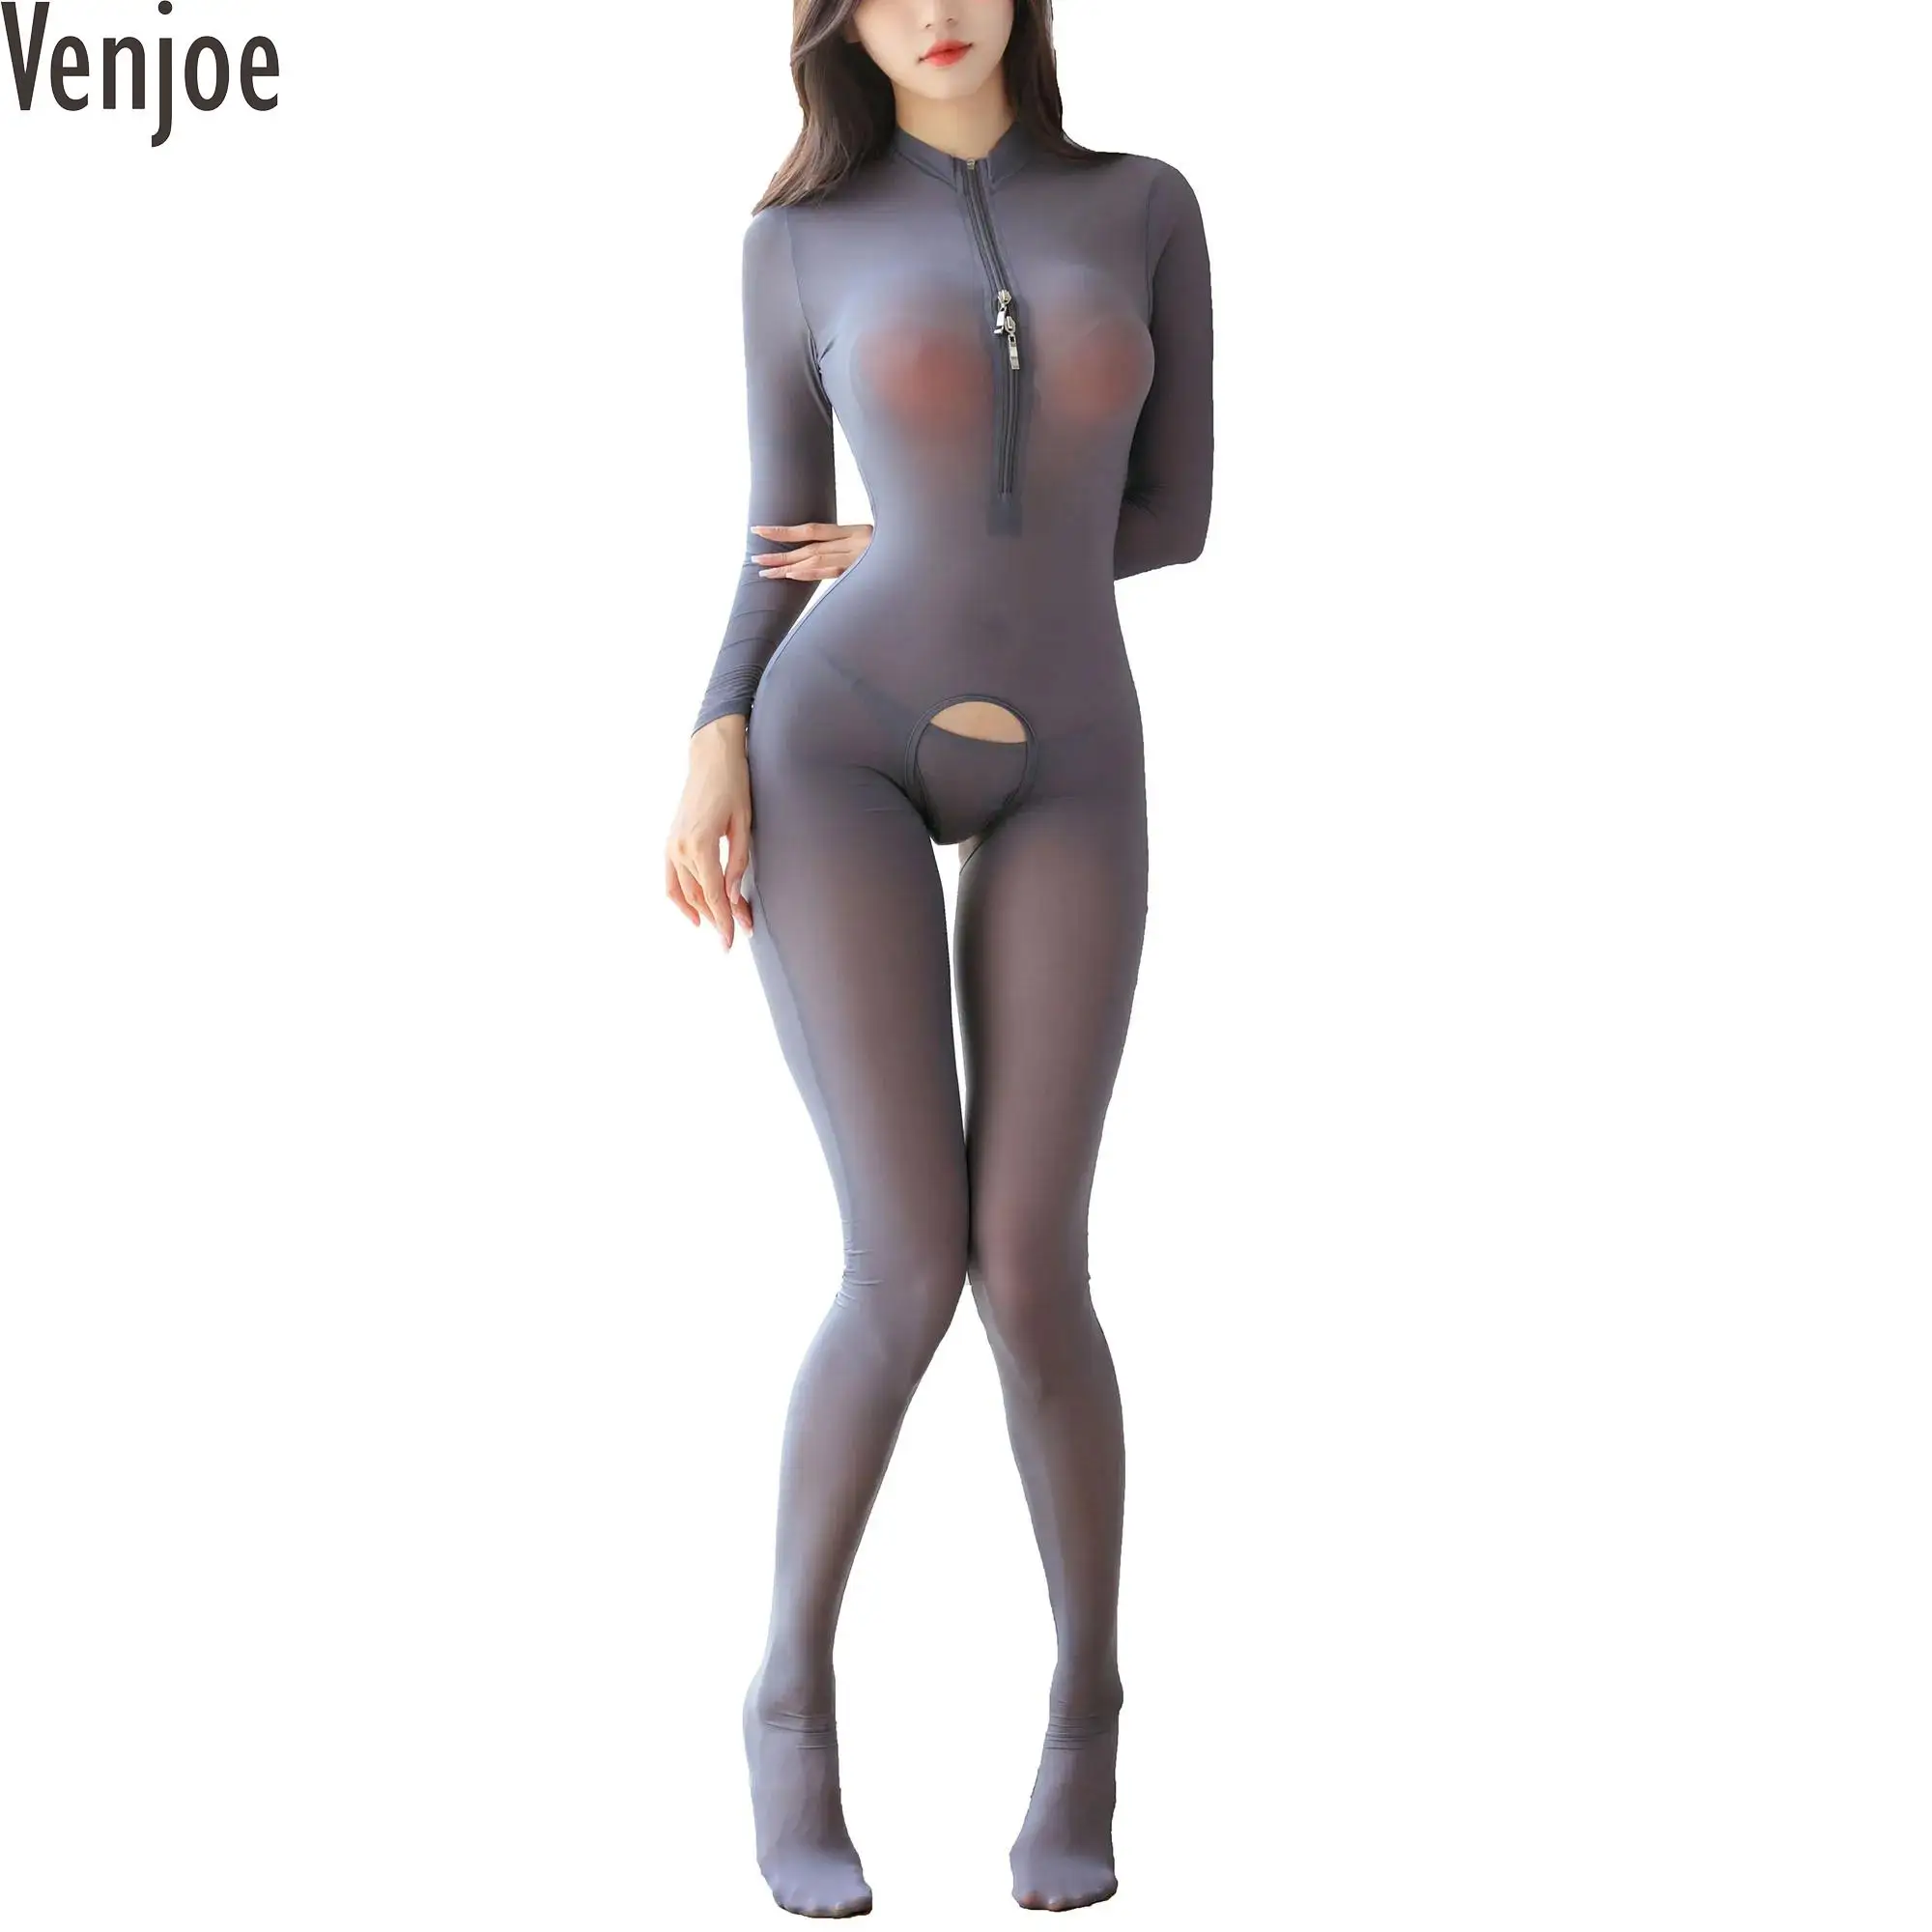 

Womens Stand Collar Crotchless Bodystocking See Through Bodysuit Lingerie Nightwear Long Sleeve Zipper Catsuit with G-string